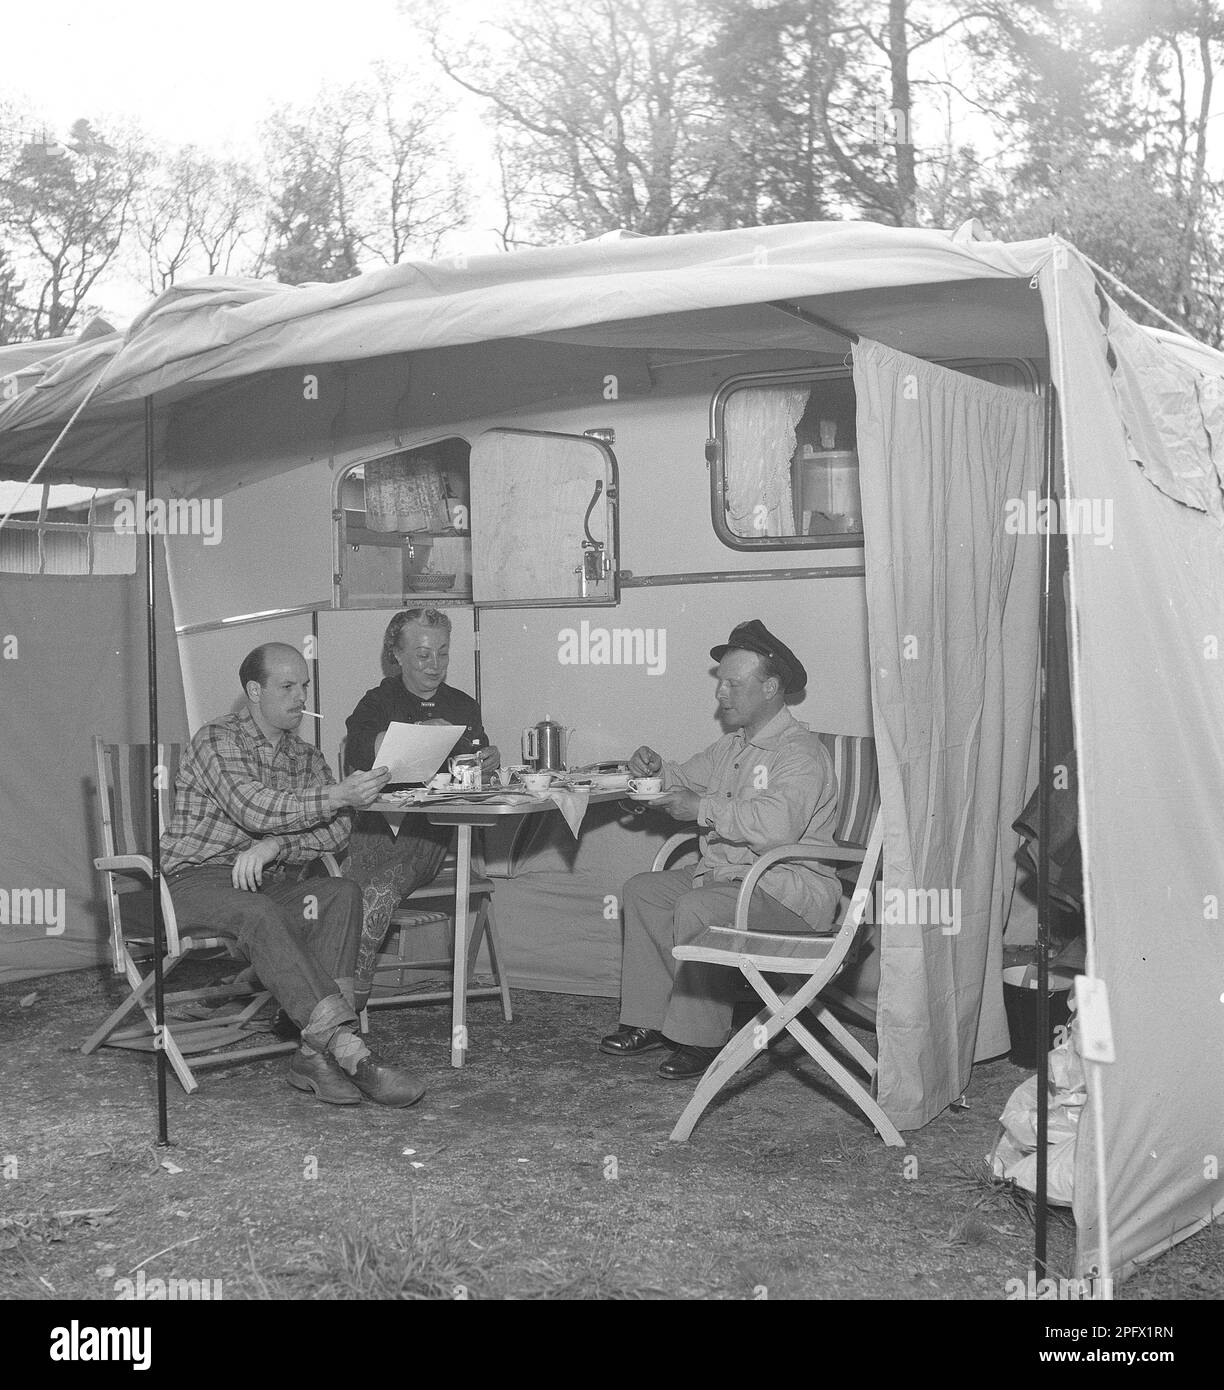 1950s camping. Three people are sitting by their caravan enjoying a cup of coffee. The use of caravans to spend the summer holiday was fairly new at this time.  Sweden July 1953. Kristoffersson ref BP30-9 Stock Photo